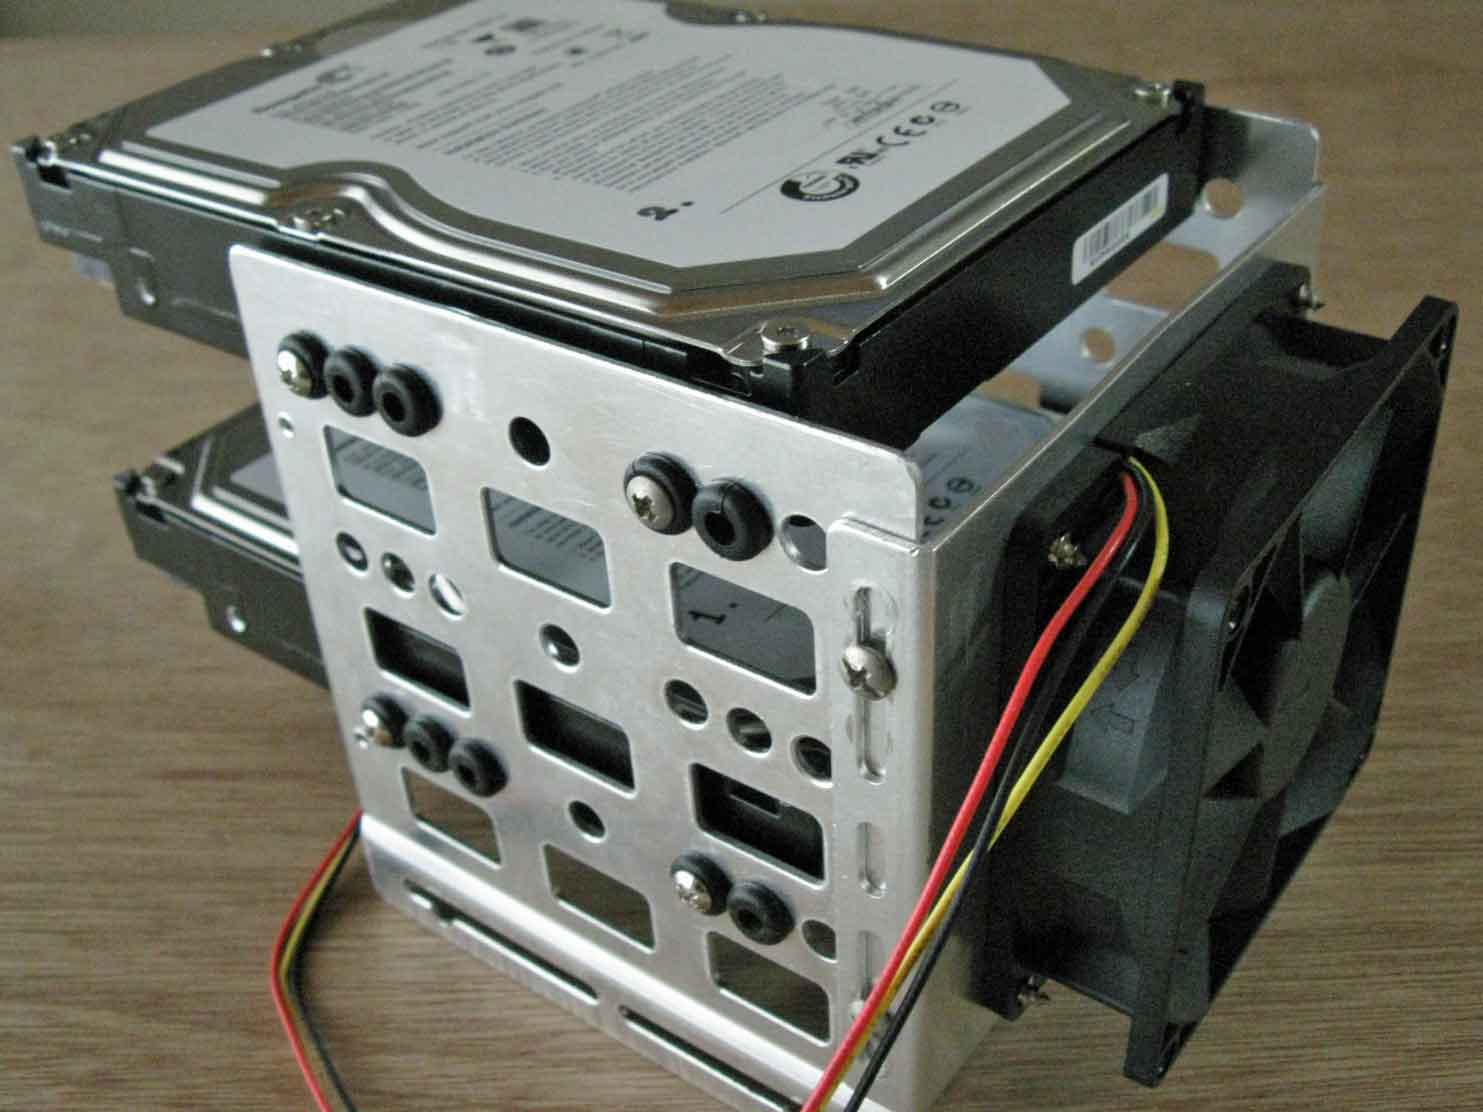 The cooling of a hard disk